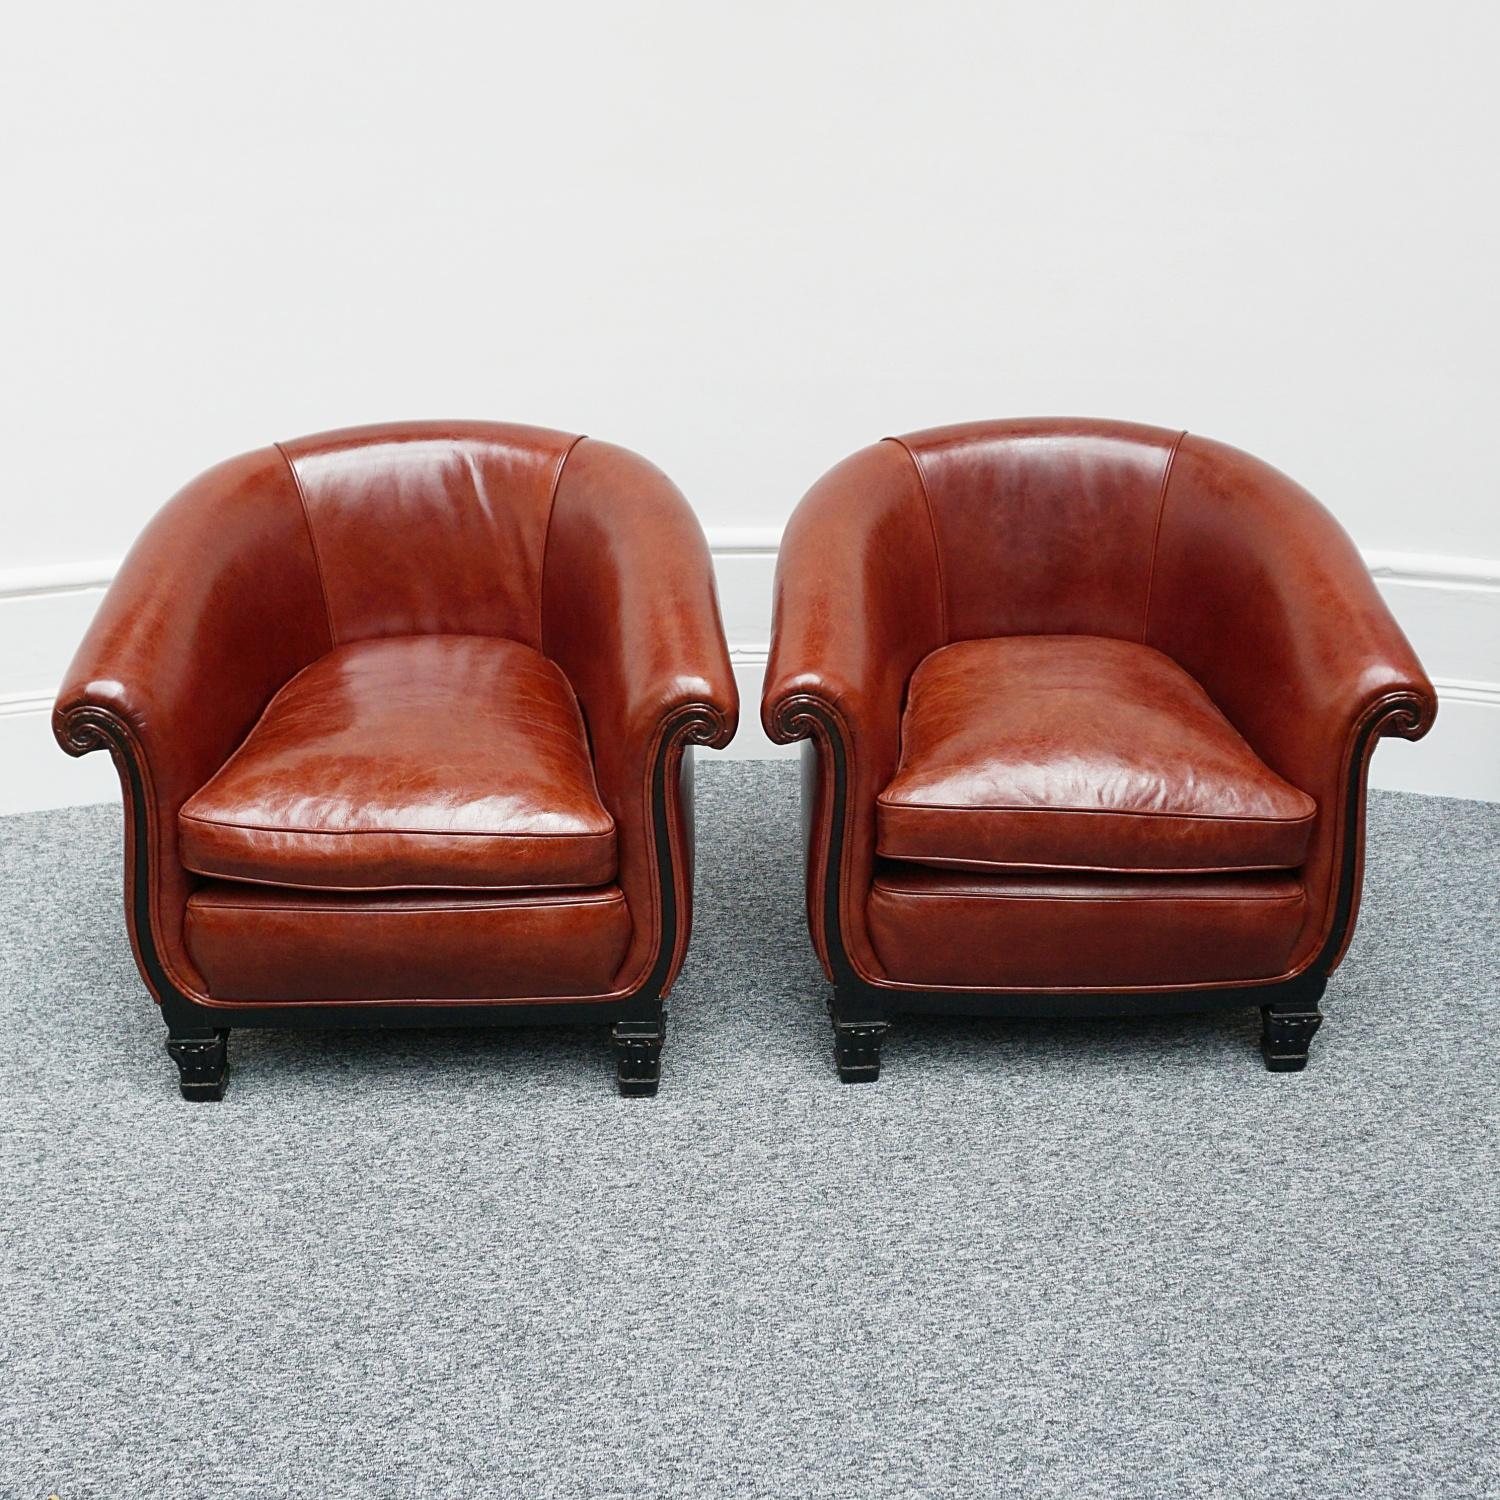 Pair of French Art Deco Club Chairs Re-Upholstered in Chestnut Leather 8